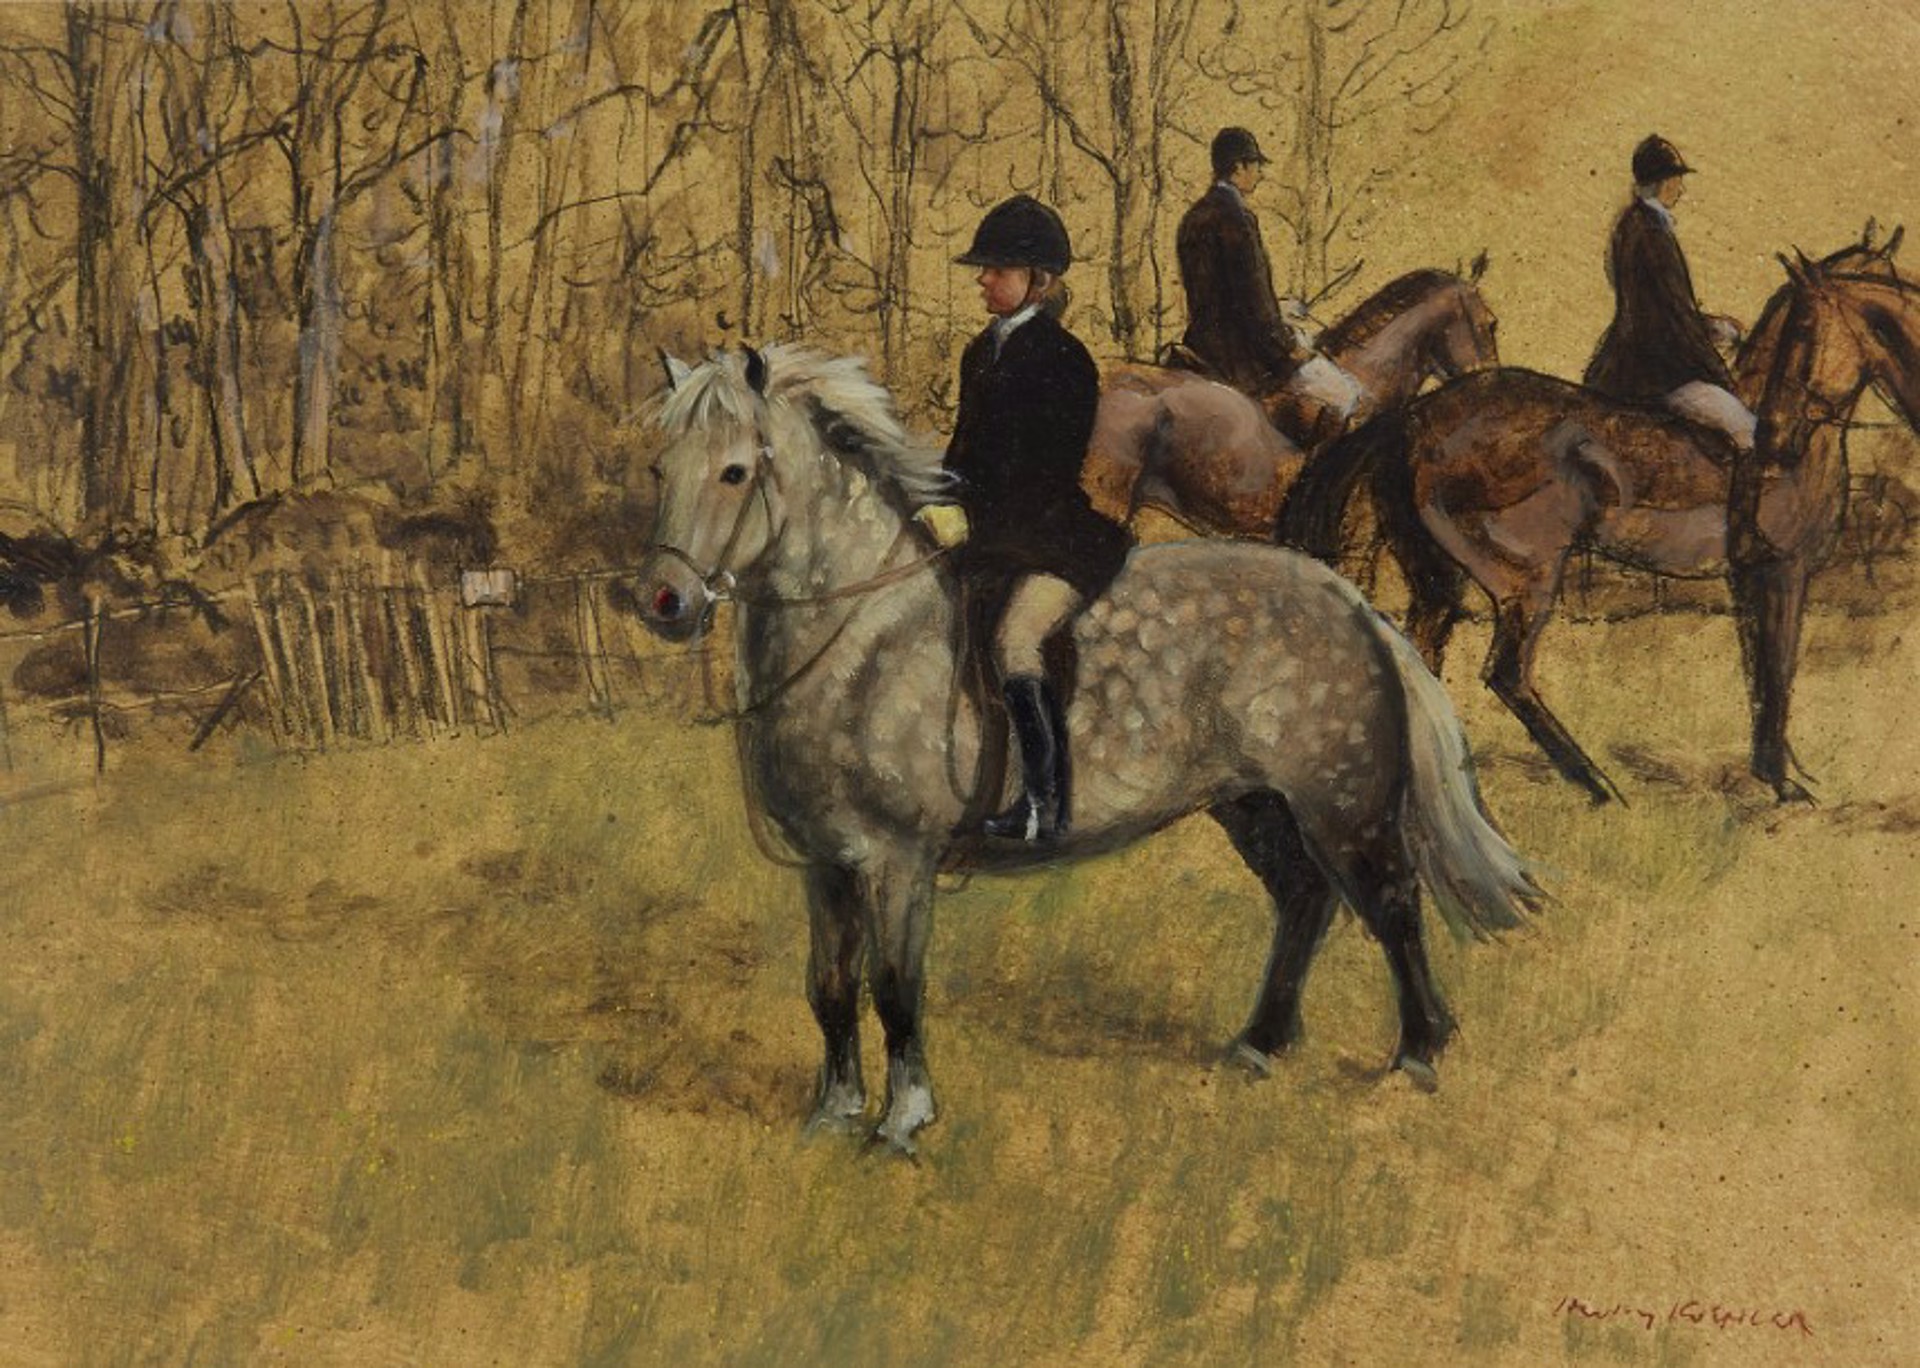 The Hunting Pony by Henry Koehler